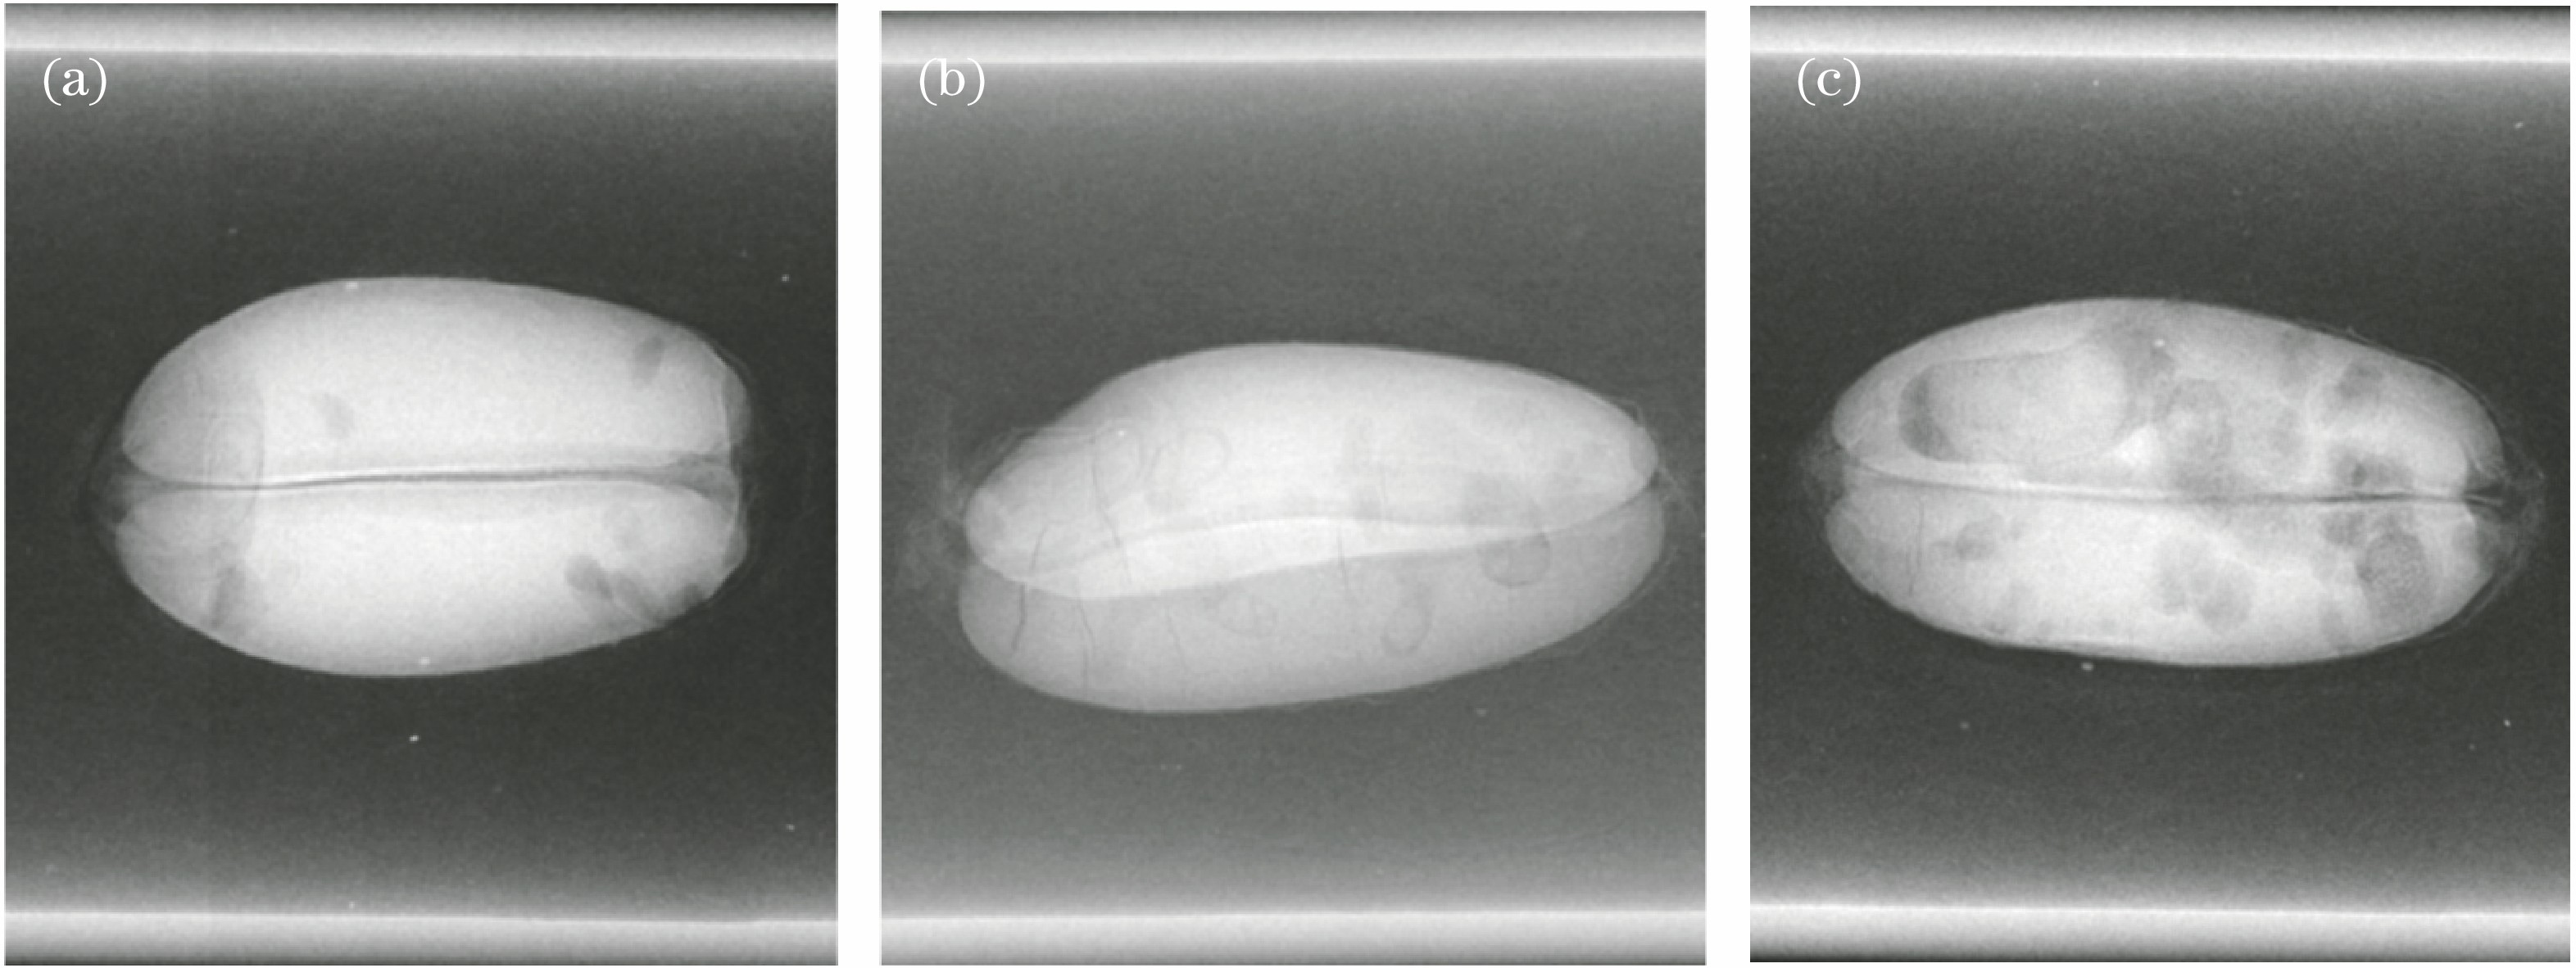 Wheat grain projection data for different infestation periods. (a) Egg stage; (b) young larval stage; (c) old larval stage